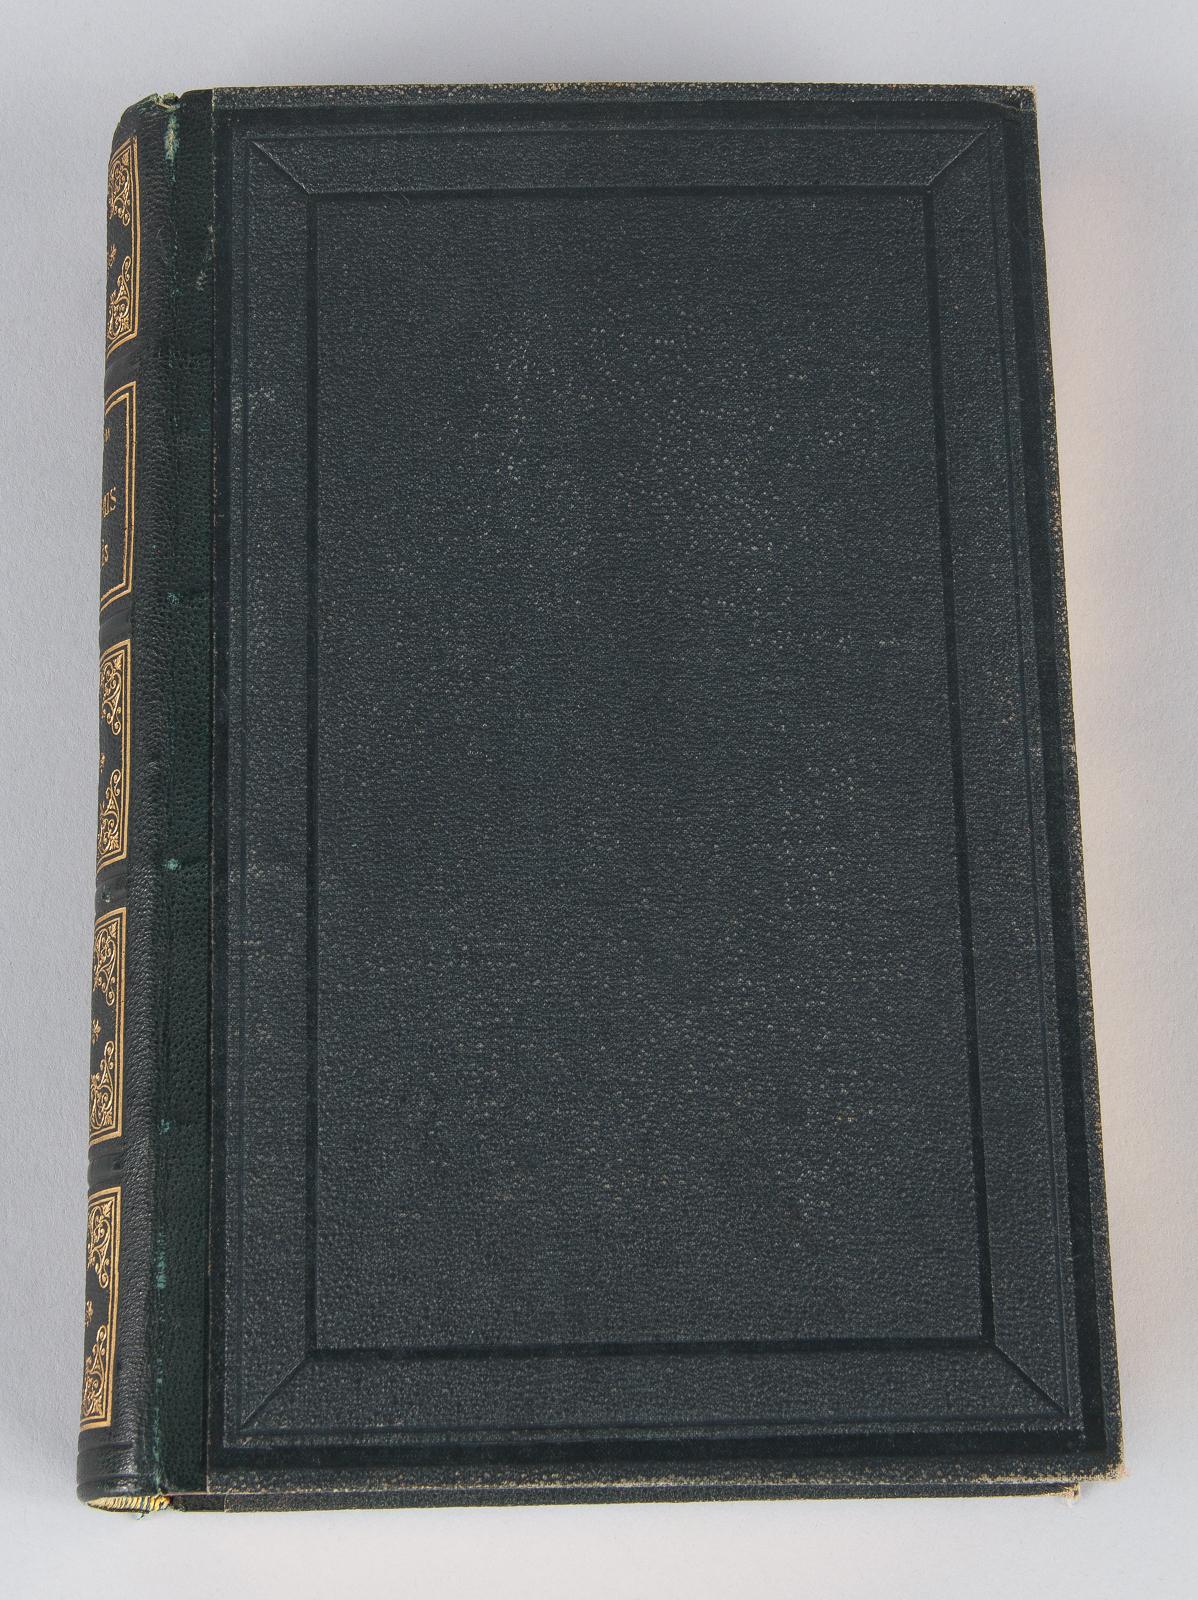 Leather French Book, Nos Ennemis et Nos Allies by Arthur Mangin, 1870